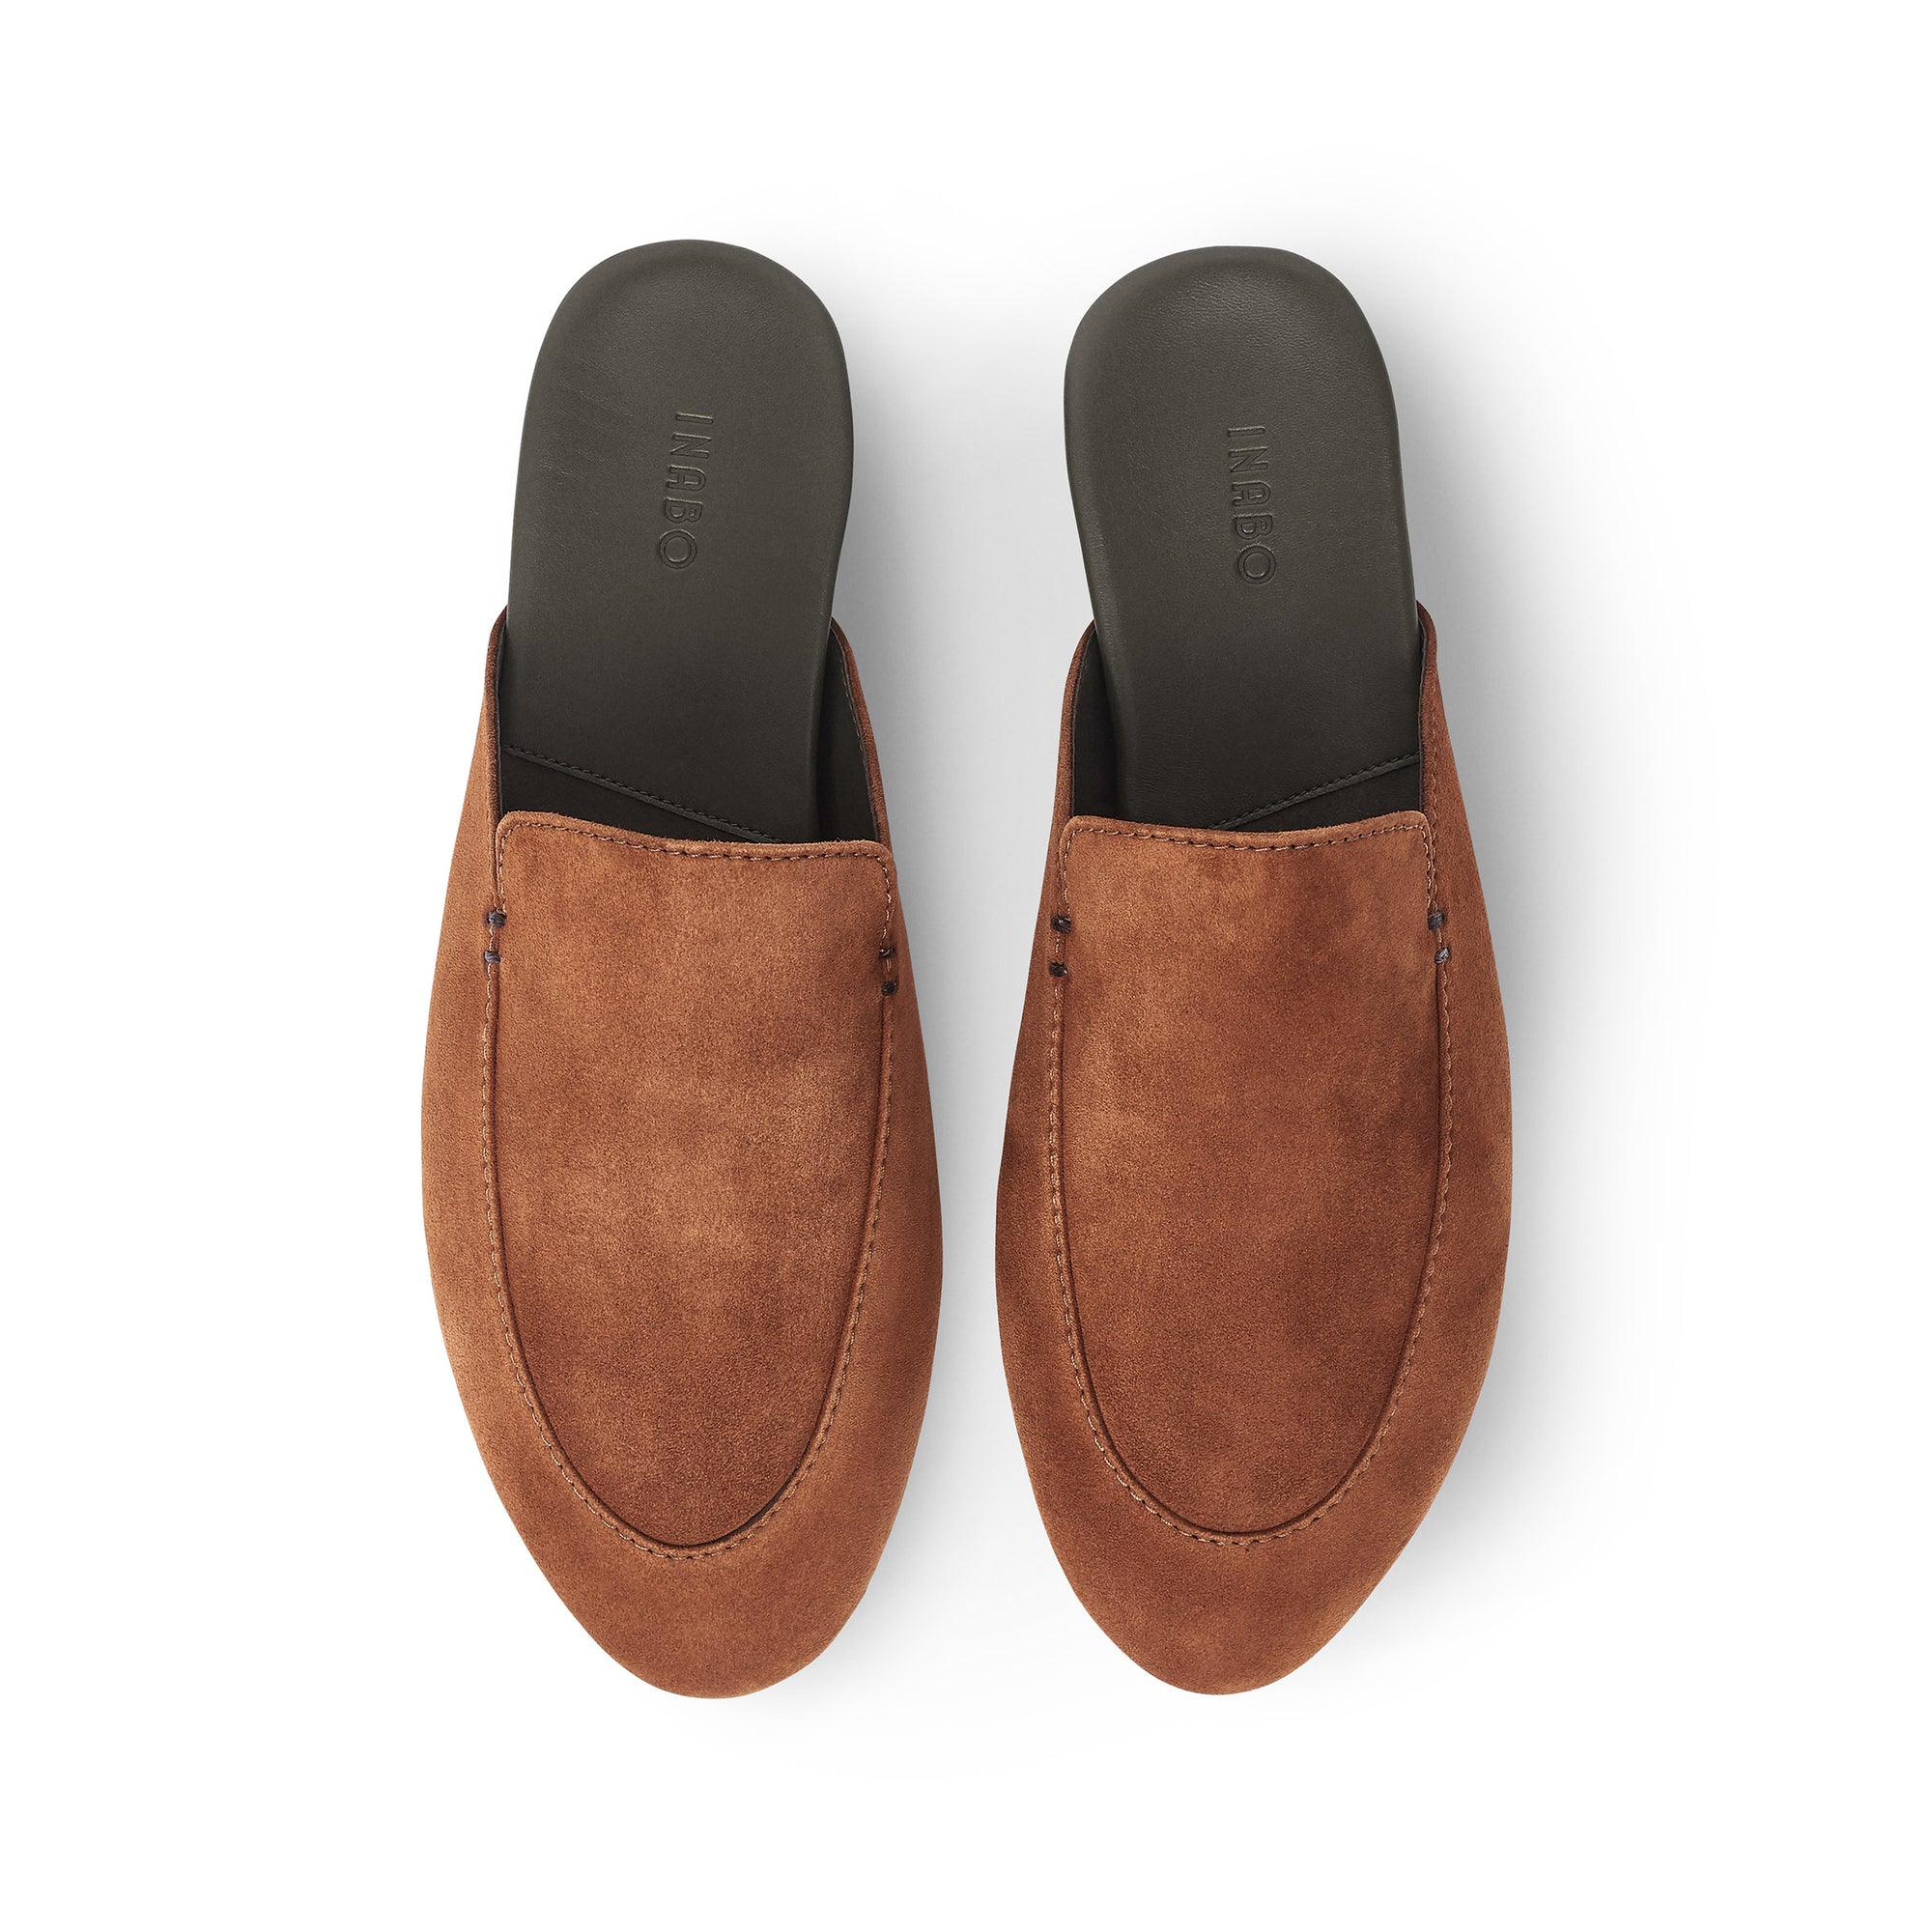 Inabo Men's Slowfer slipper in brown suede and army green leather insole shown from above